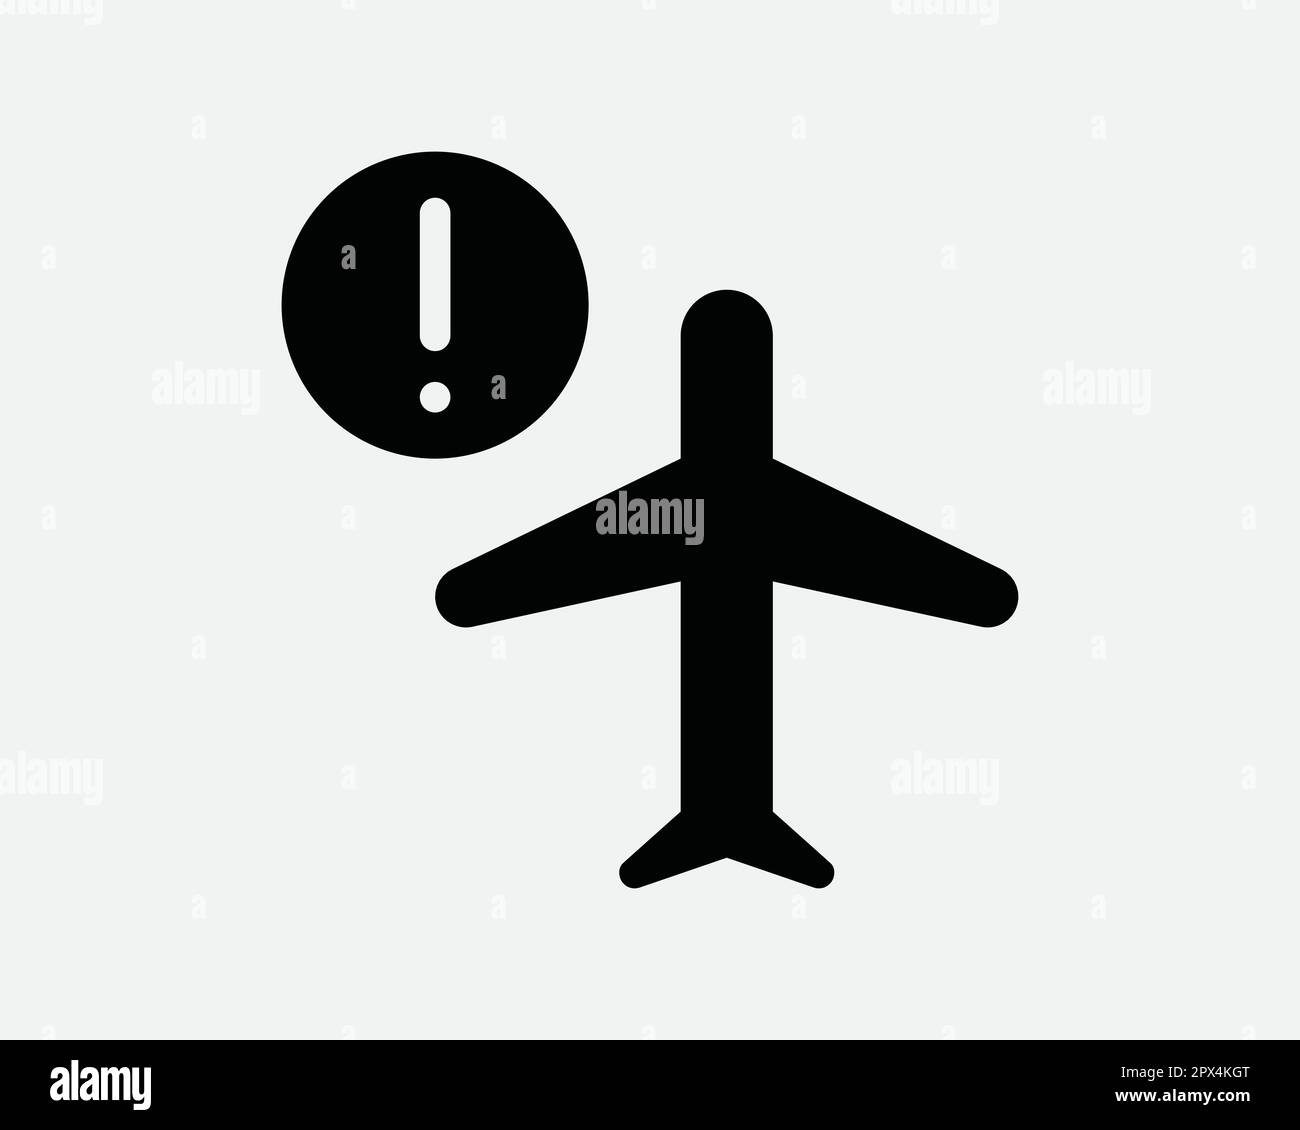 Airplane Air Plane Aircraft Error Problem Issue Warning Notice Delay Late Black and White Icon Sign Symbol Vector Artwork Clipart Illustration Stock Vector